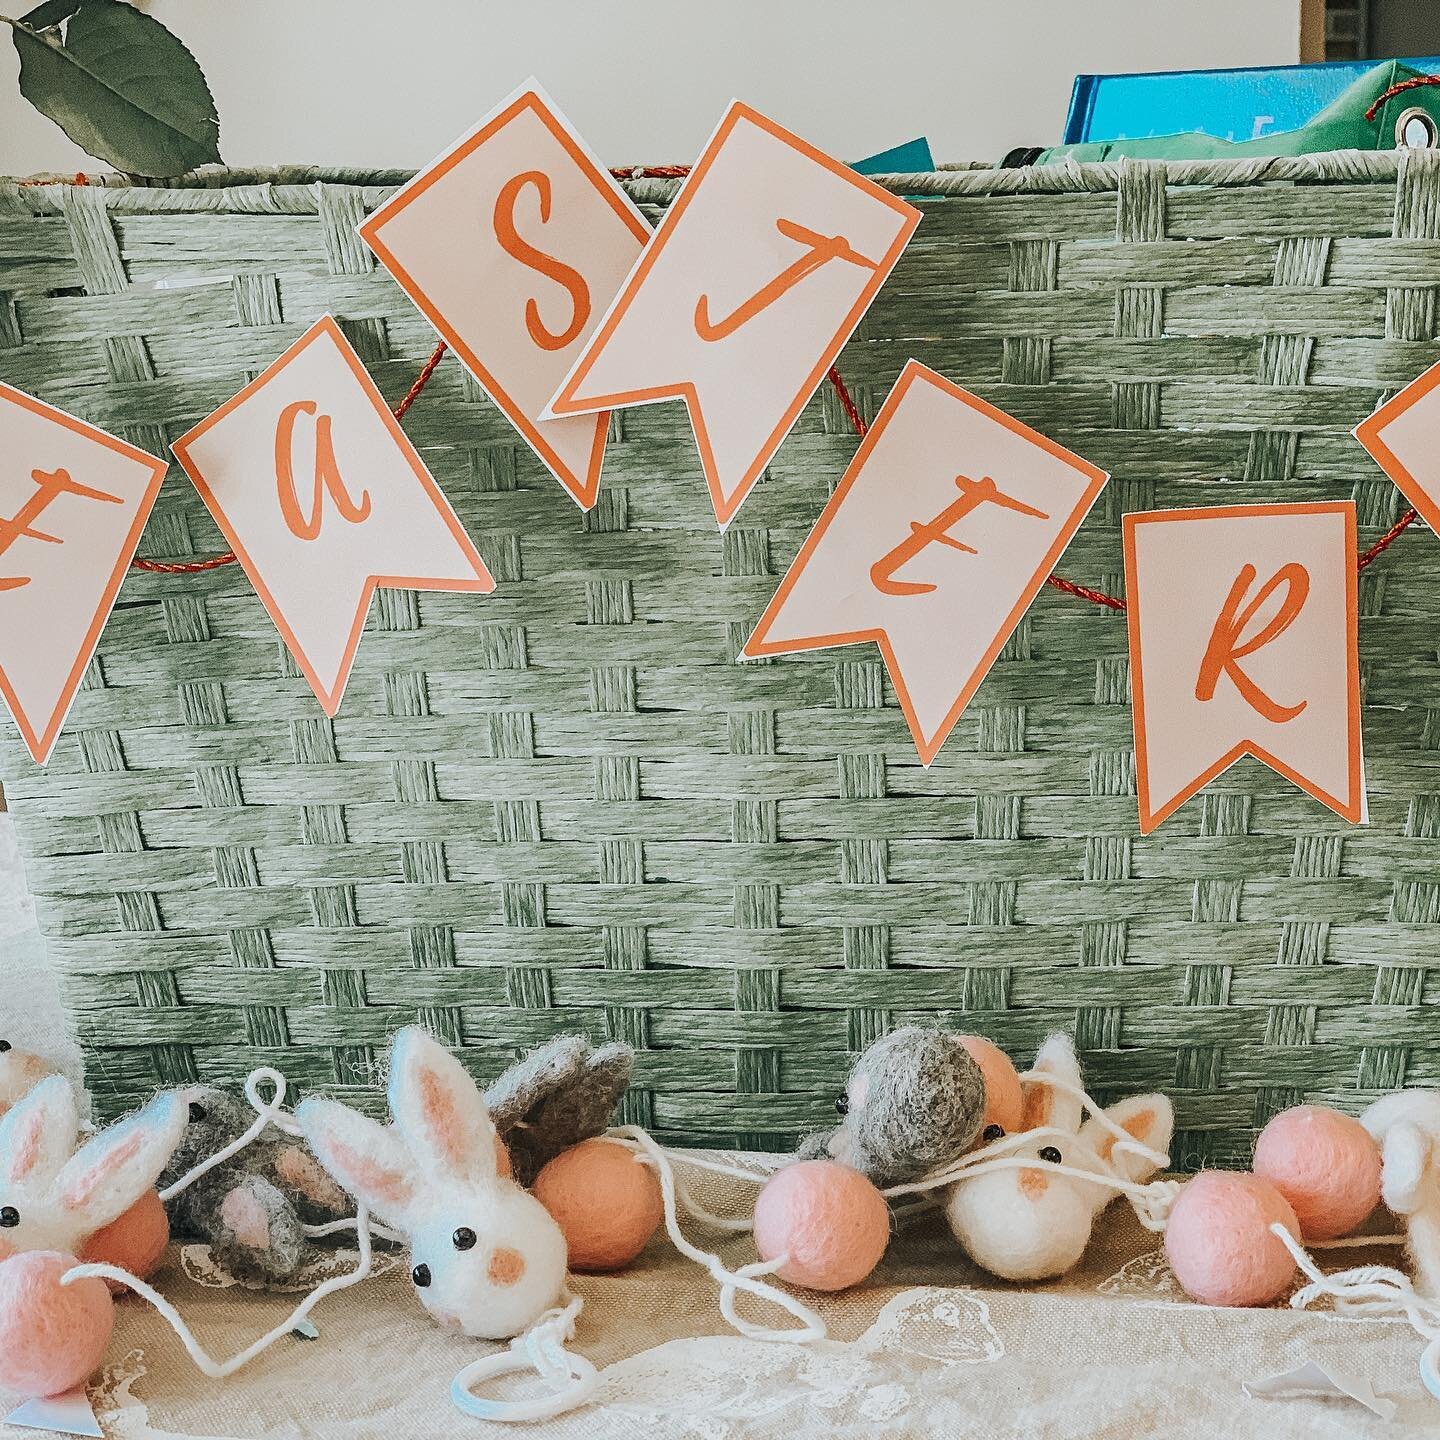 A super easy way to elevate any Easter Basket...

Create and Add a little custom banner!

And if you&rsquo;re thinking, I&rsquo;m way too busy to make this... well I gotchu cause I already made it and am giving it away fo free. Link to the free print